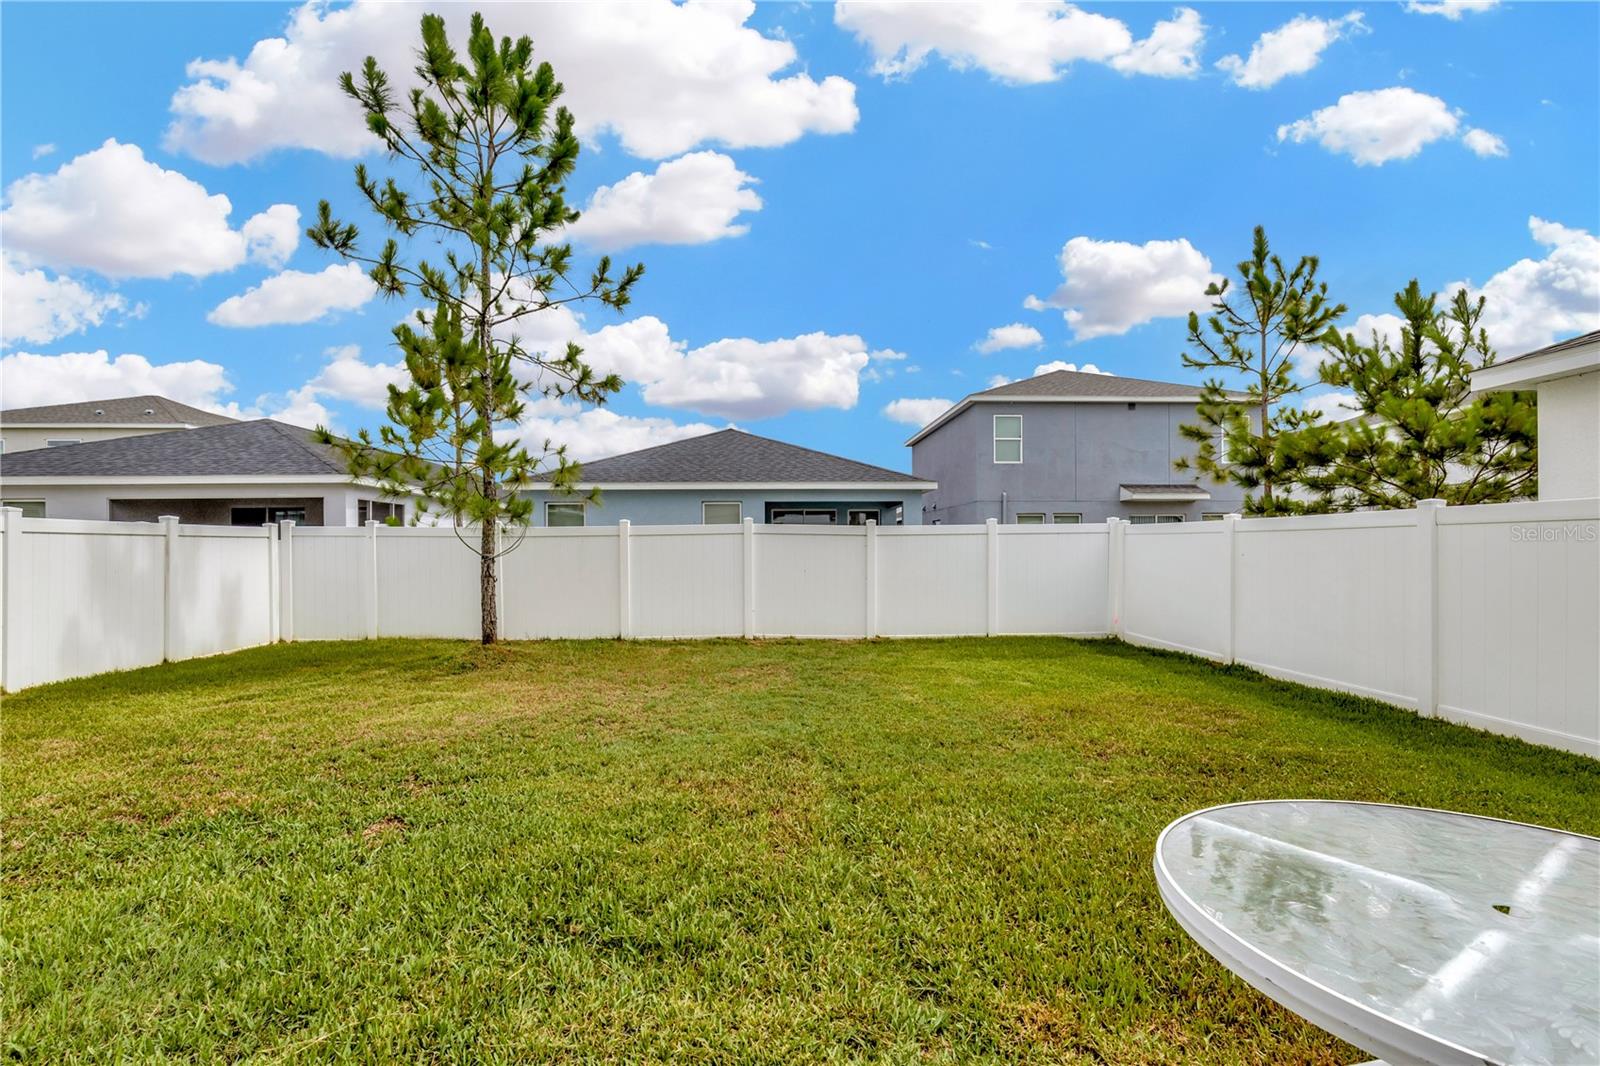 Roomy fenced backyard, waiting for your design of outdoor personal living space